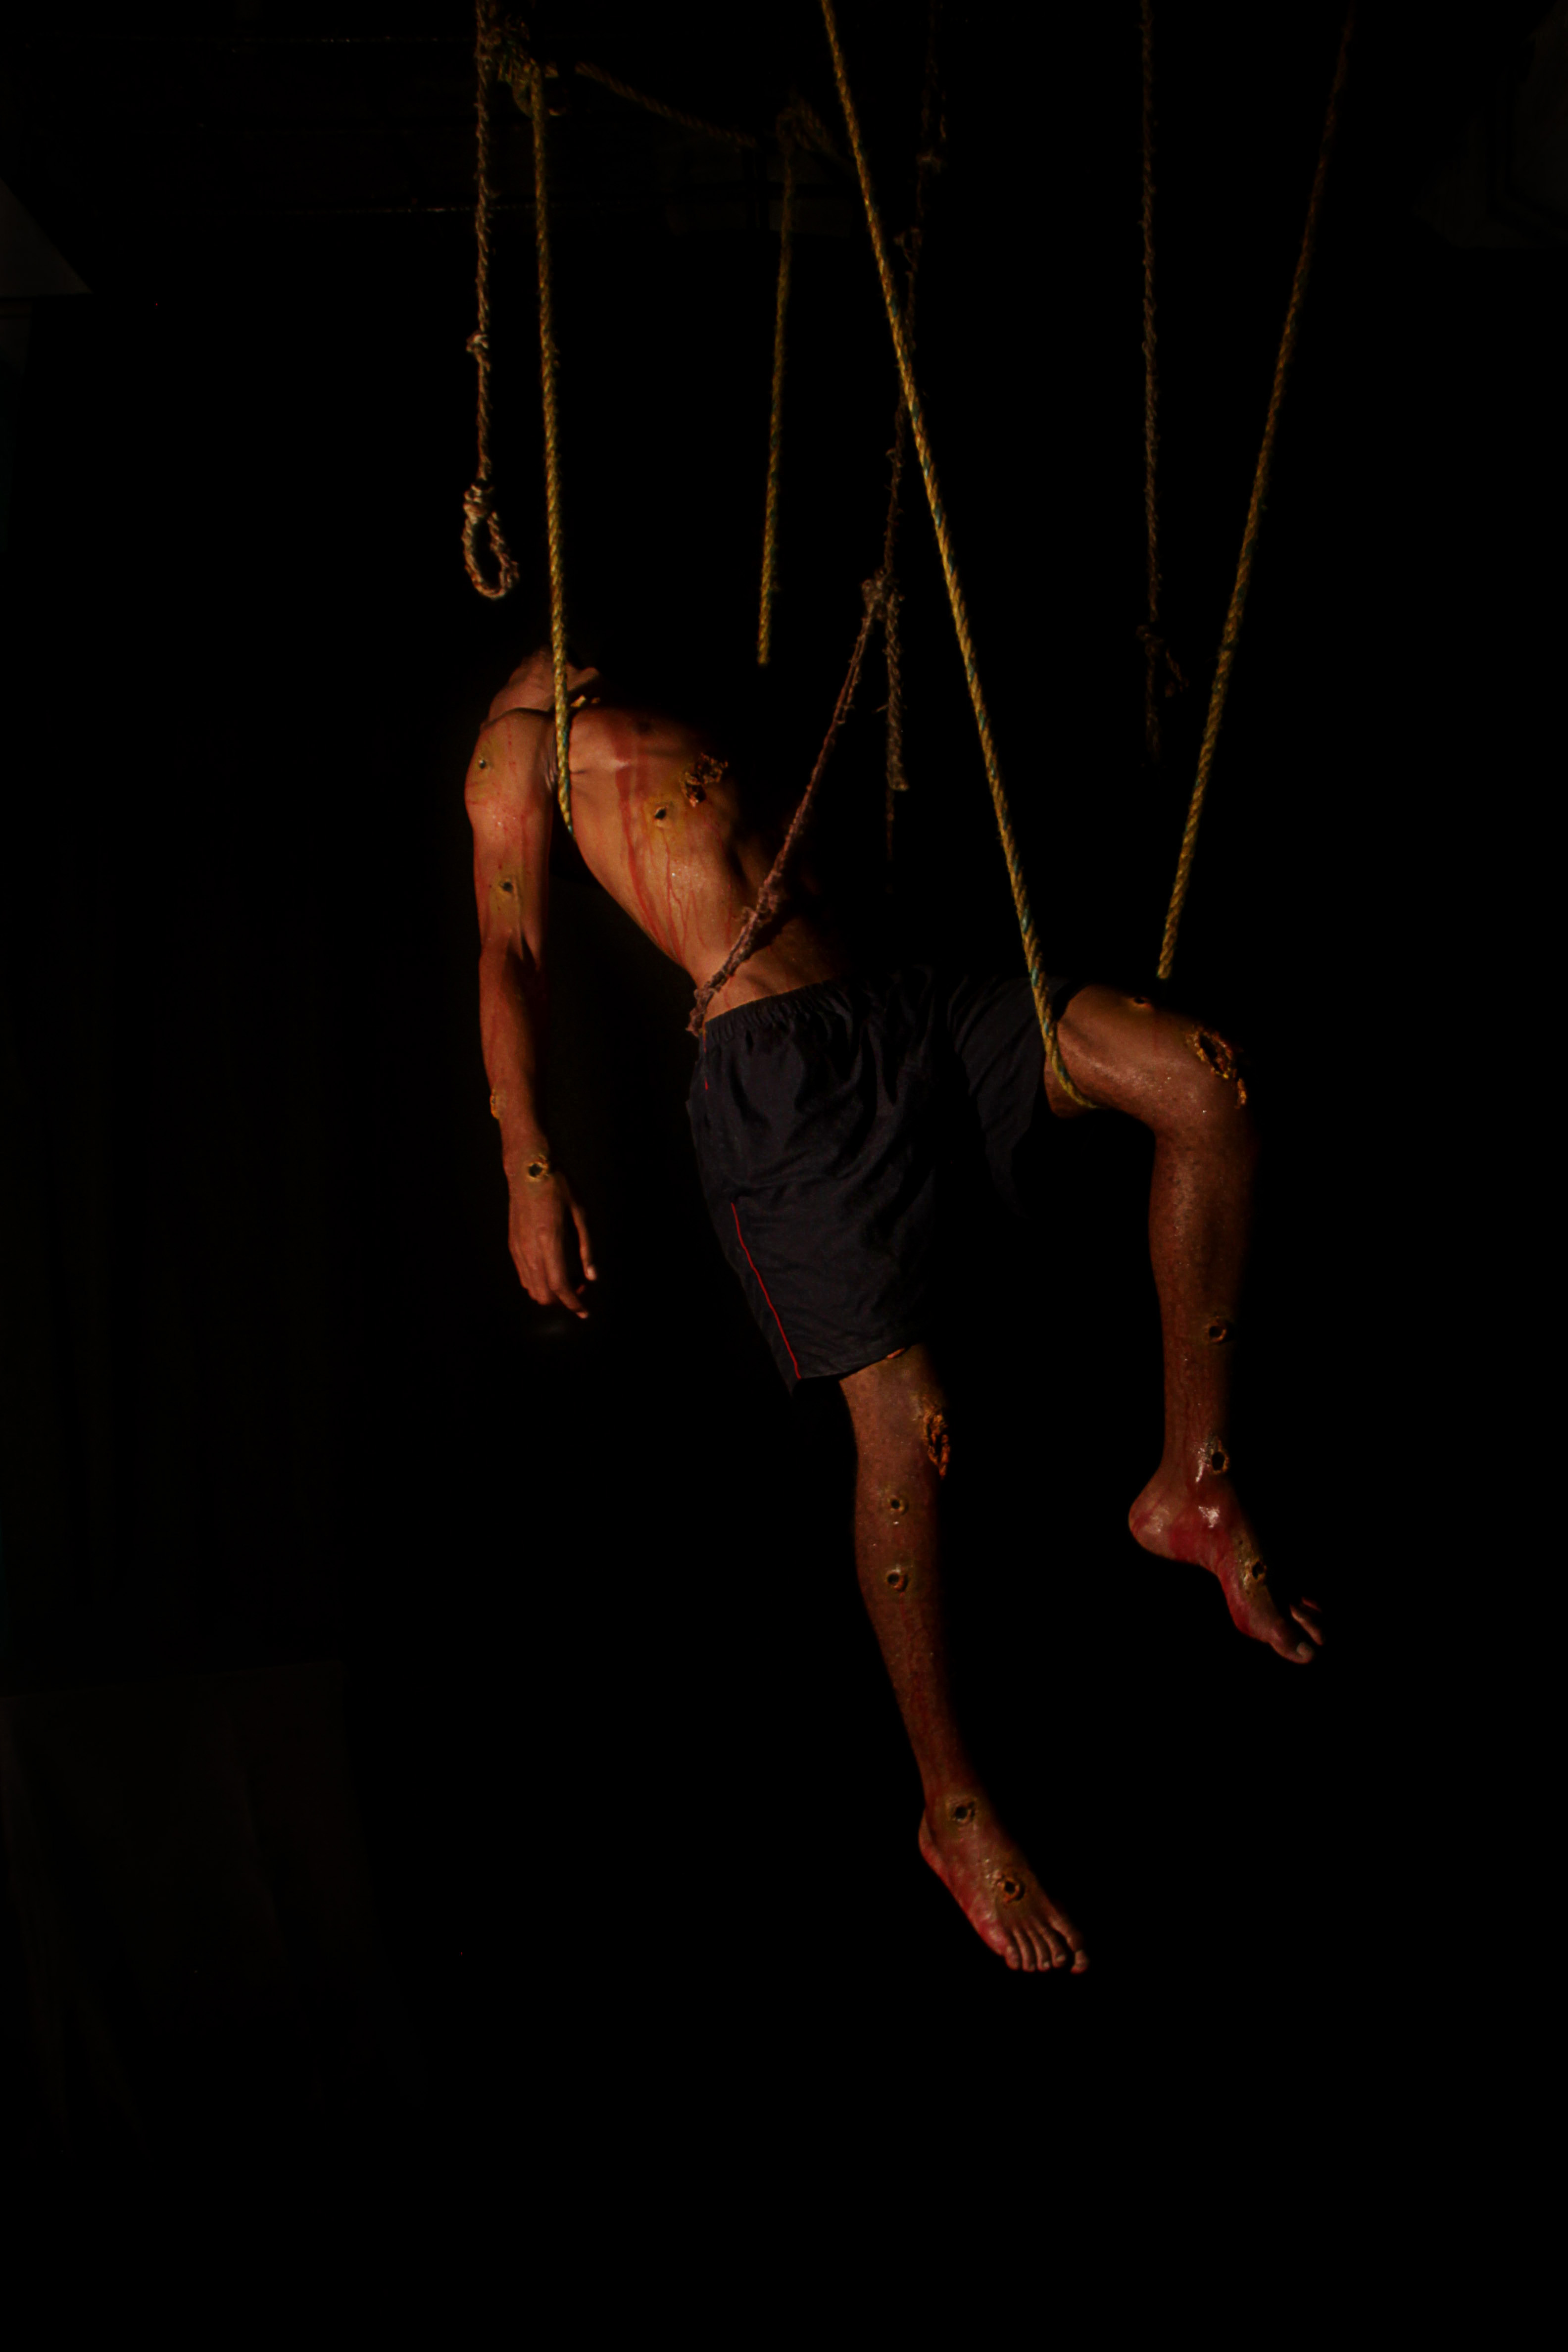 Photograph of a man suspended by a rope